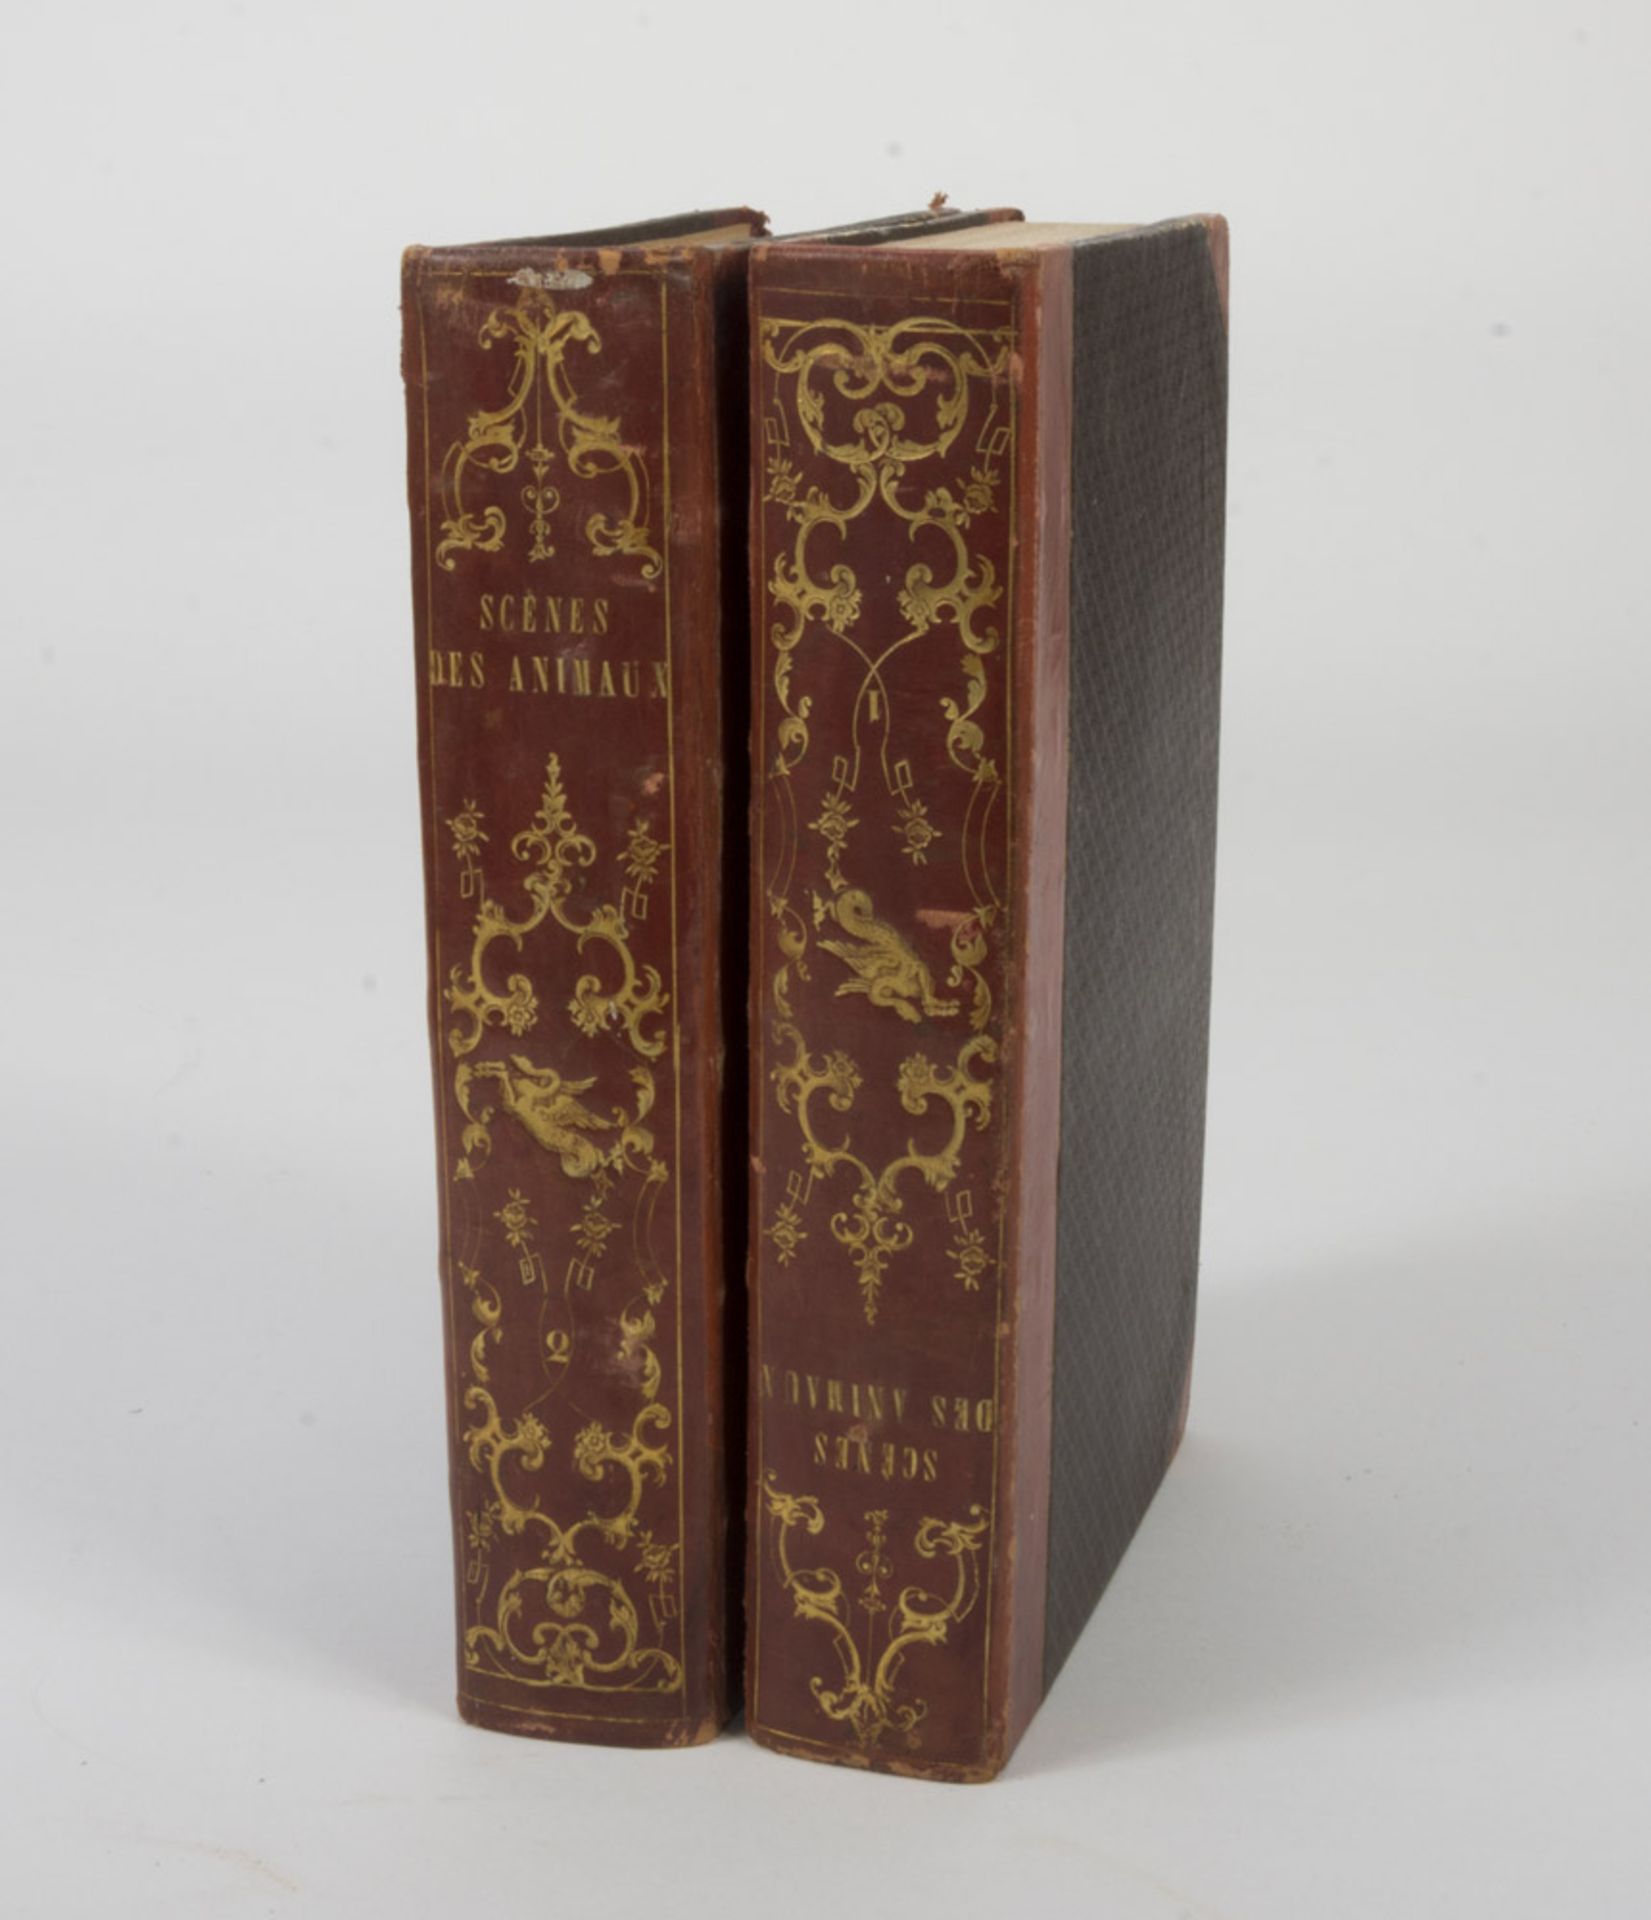 THEATRE ANIMALIER Scenes des Animaux. Two volumes with engravings. Ed. Paris 1842. Half red leather.